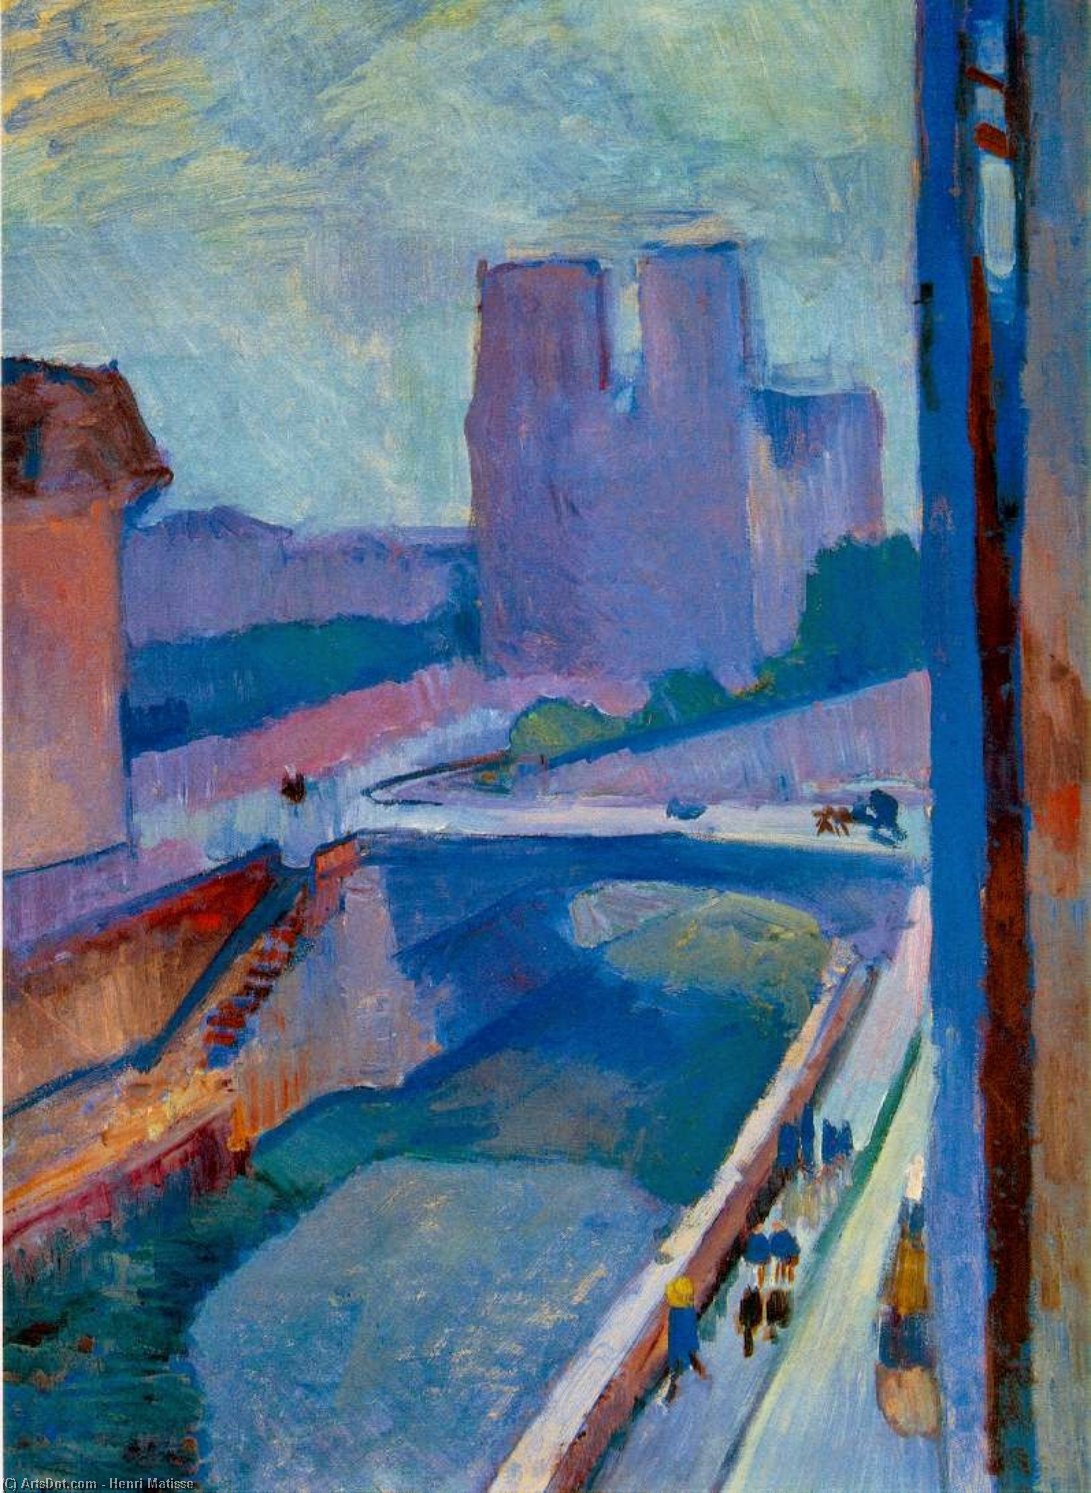 WikiOO.org - دایره المعارف هنرهای زیبا - نقاشی، آثار هنری Henri Matisse - A Glimpse of Notre-Dame in the Late Afternoon